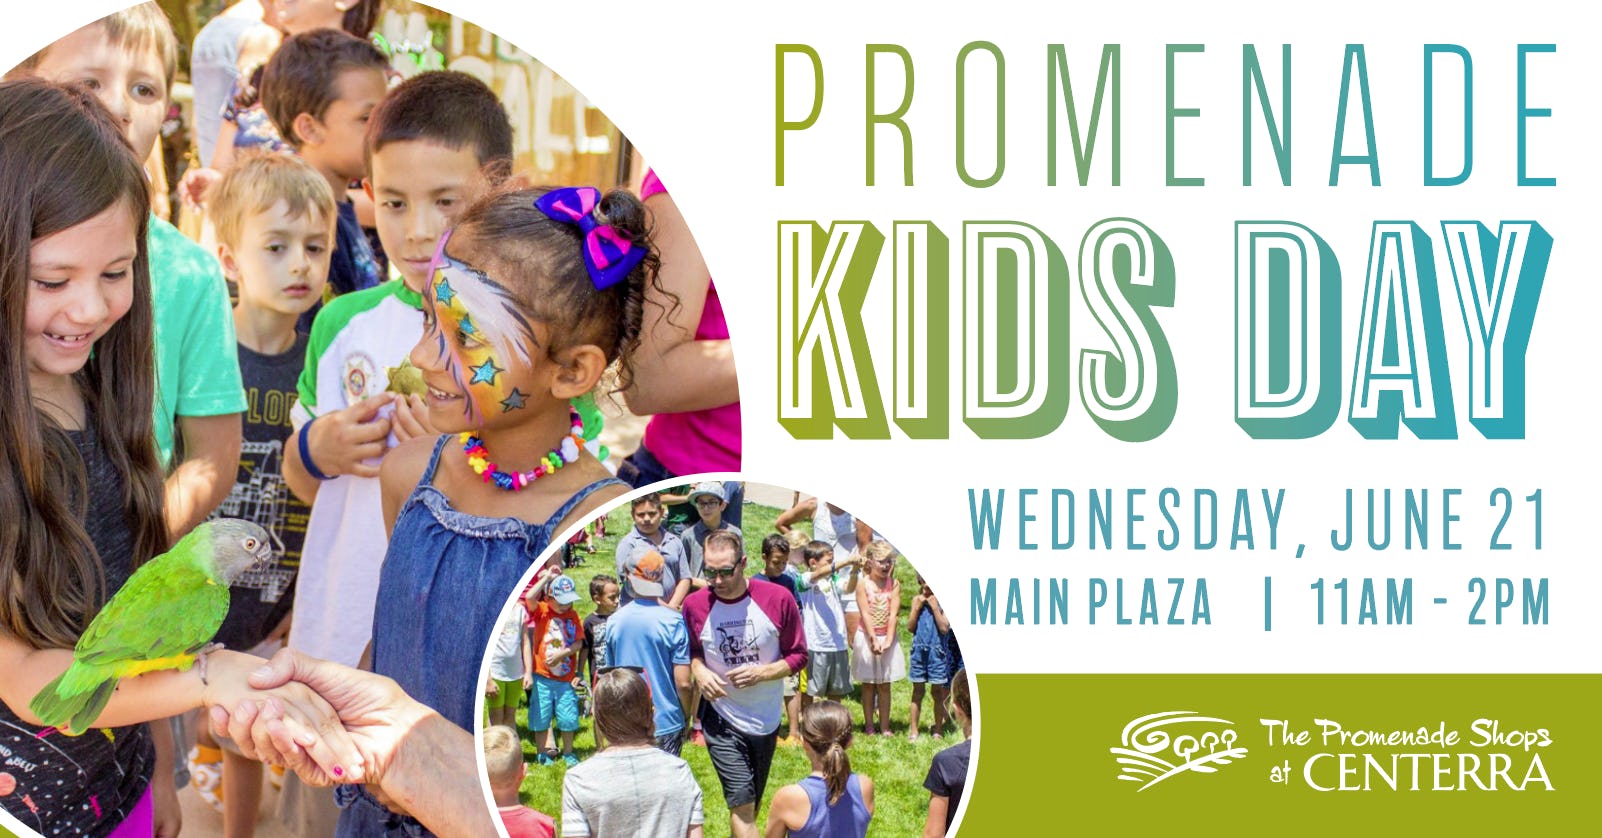 Promenade Kids Day | Wednesday, June 21st from 11am to 2pm